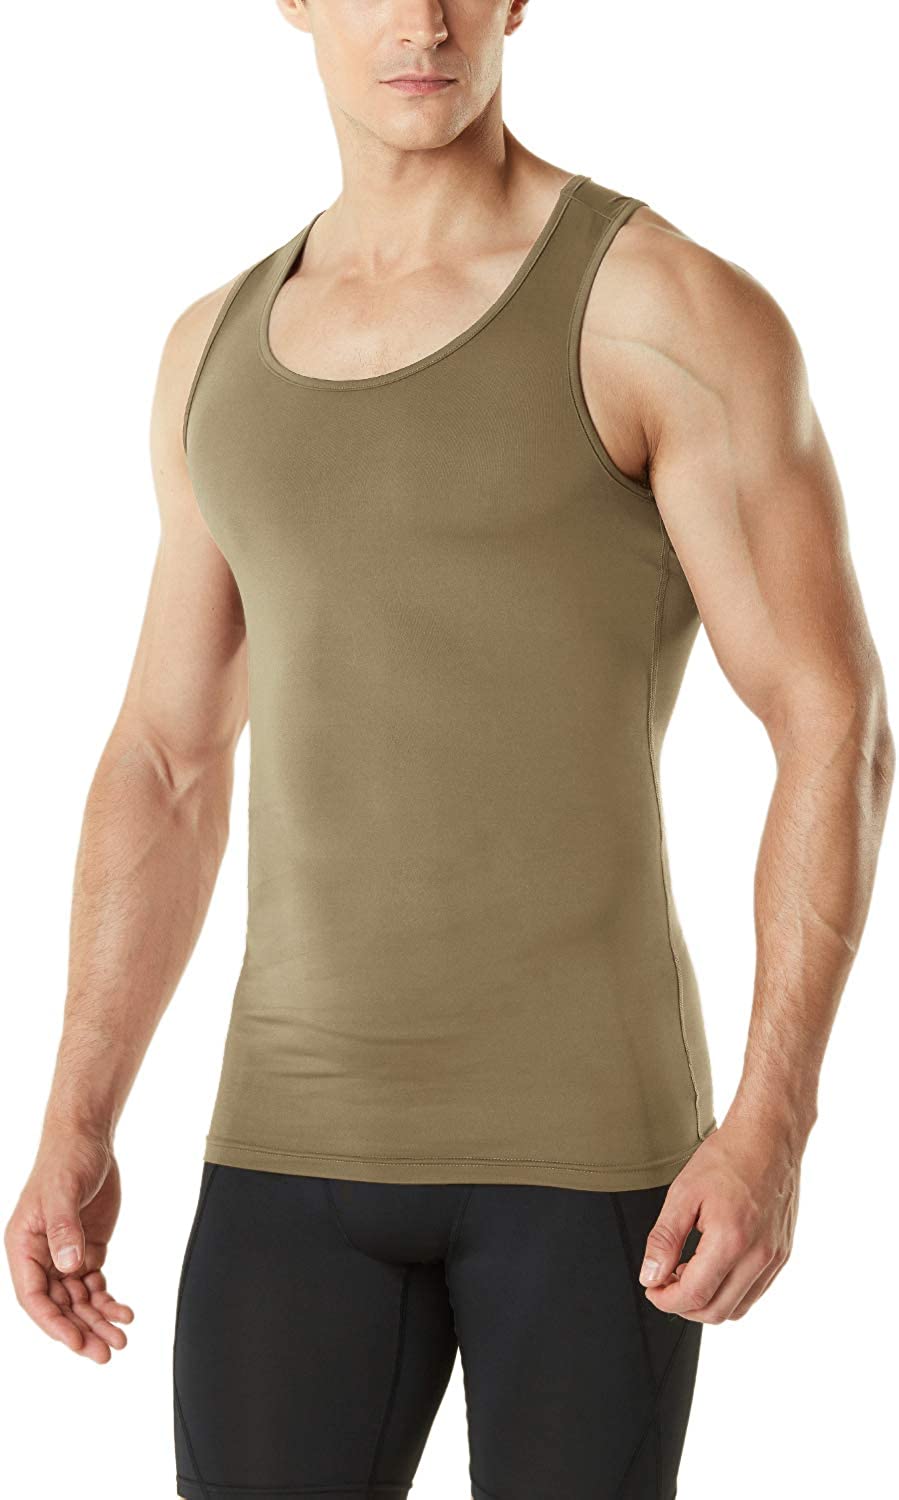 Cool Dry Sports Details about   TSLA 1 or 3 Pack Men's Athletic Compression Sleeveless Tank Top 